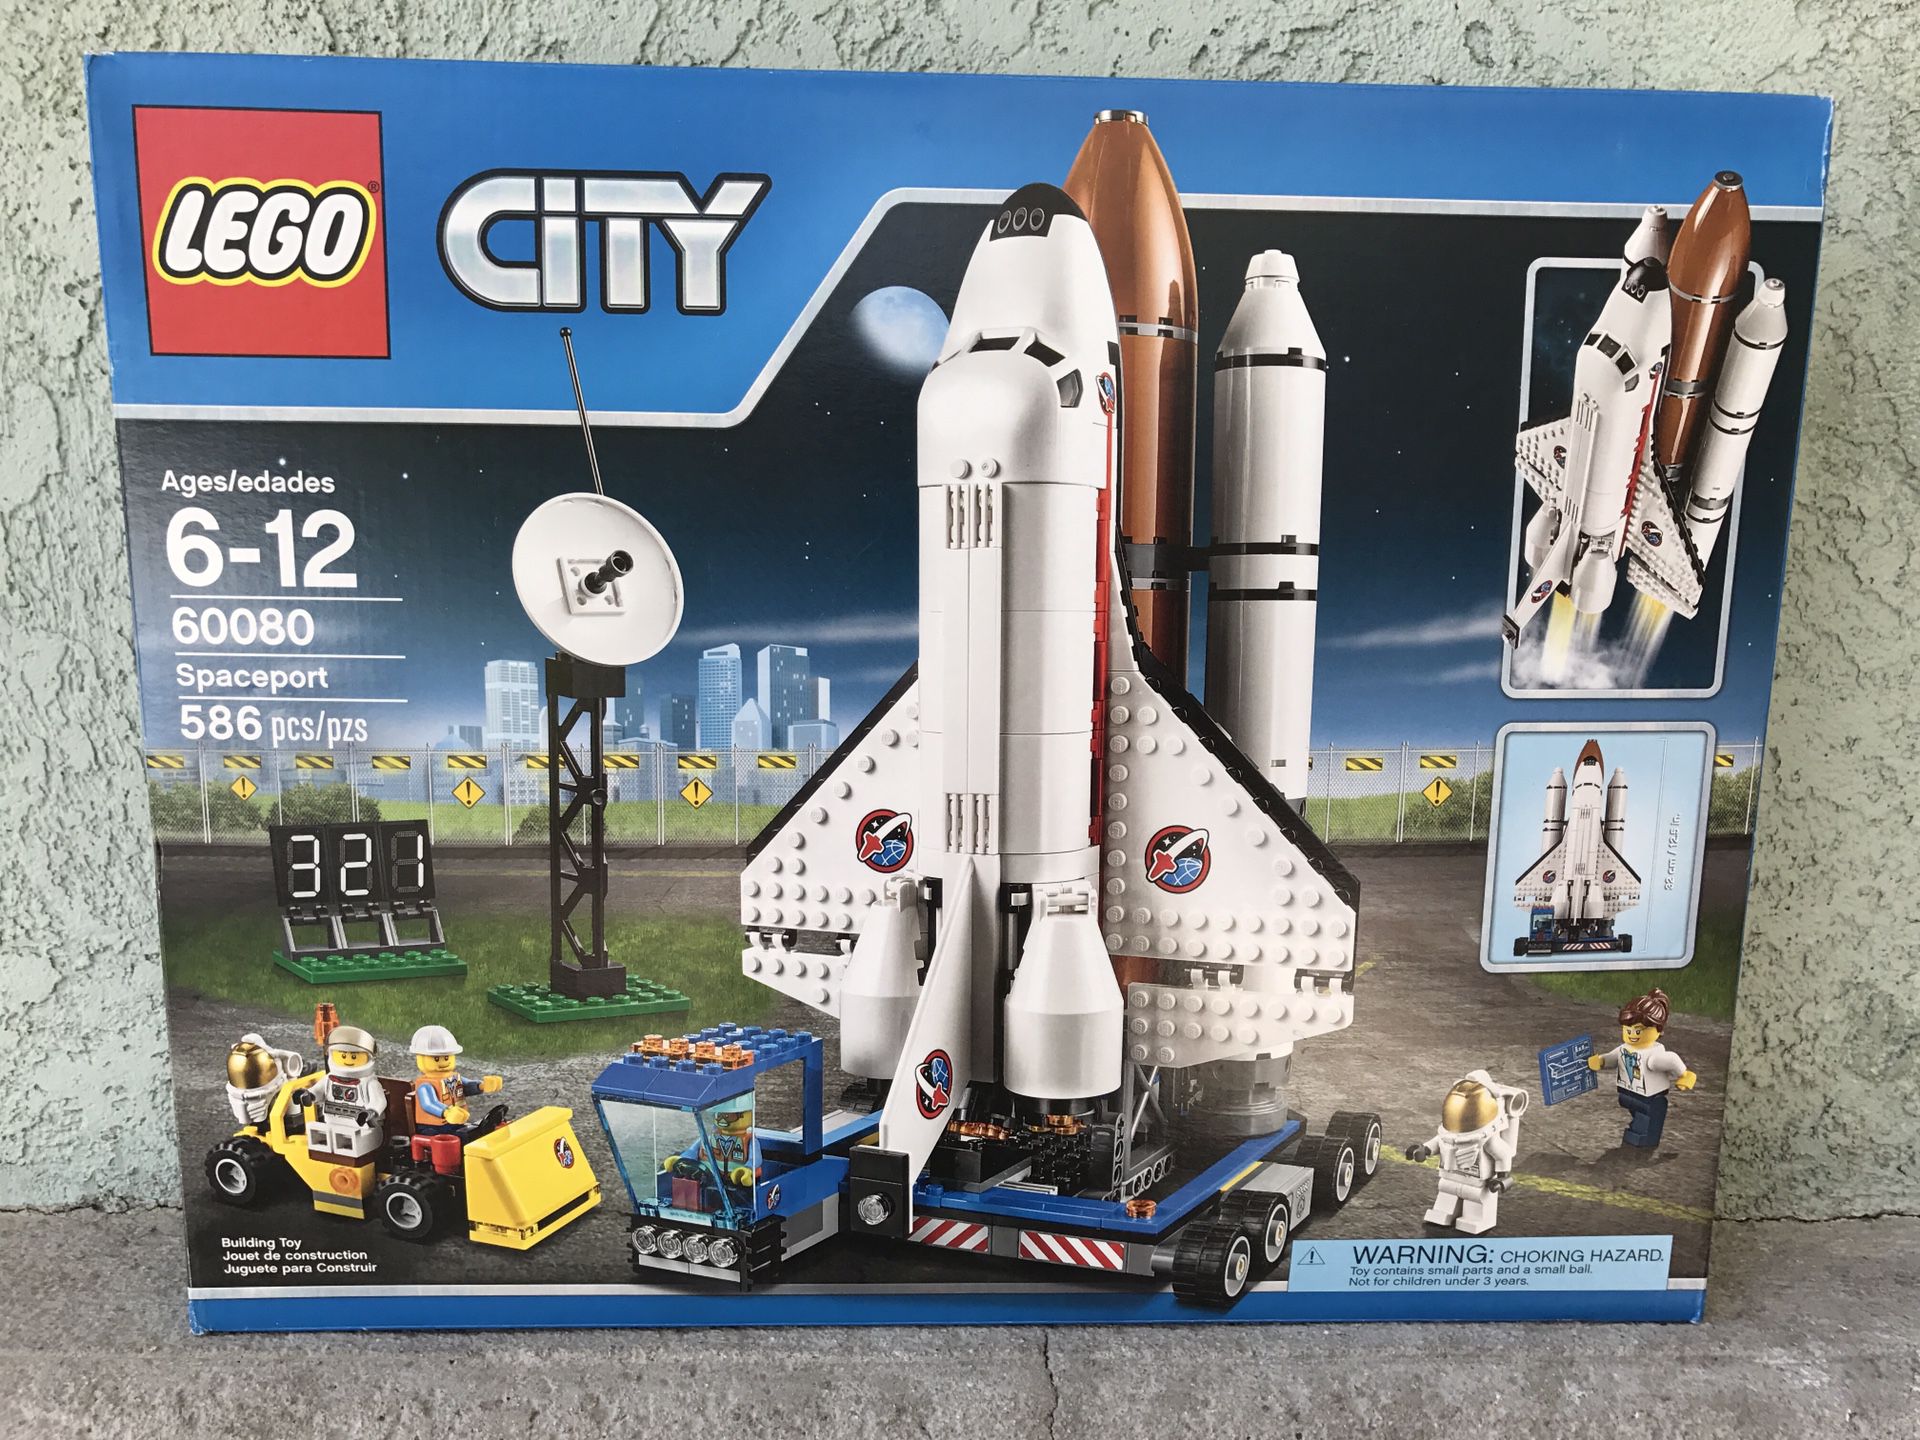 Lego city 60080 Sale in CA - OfferUp